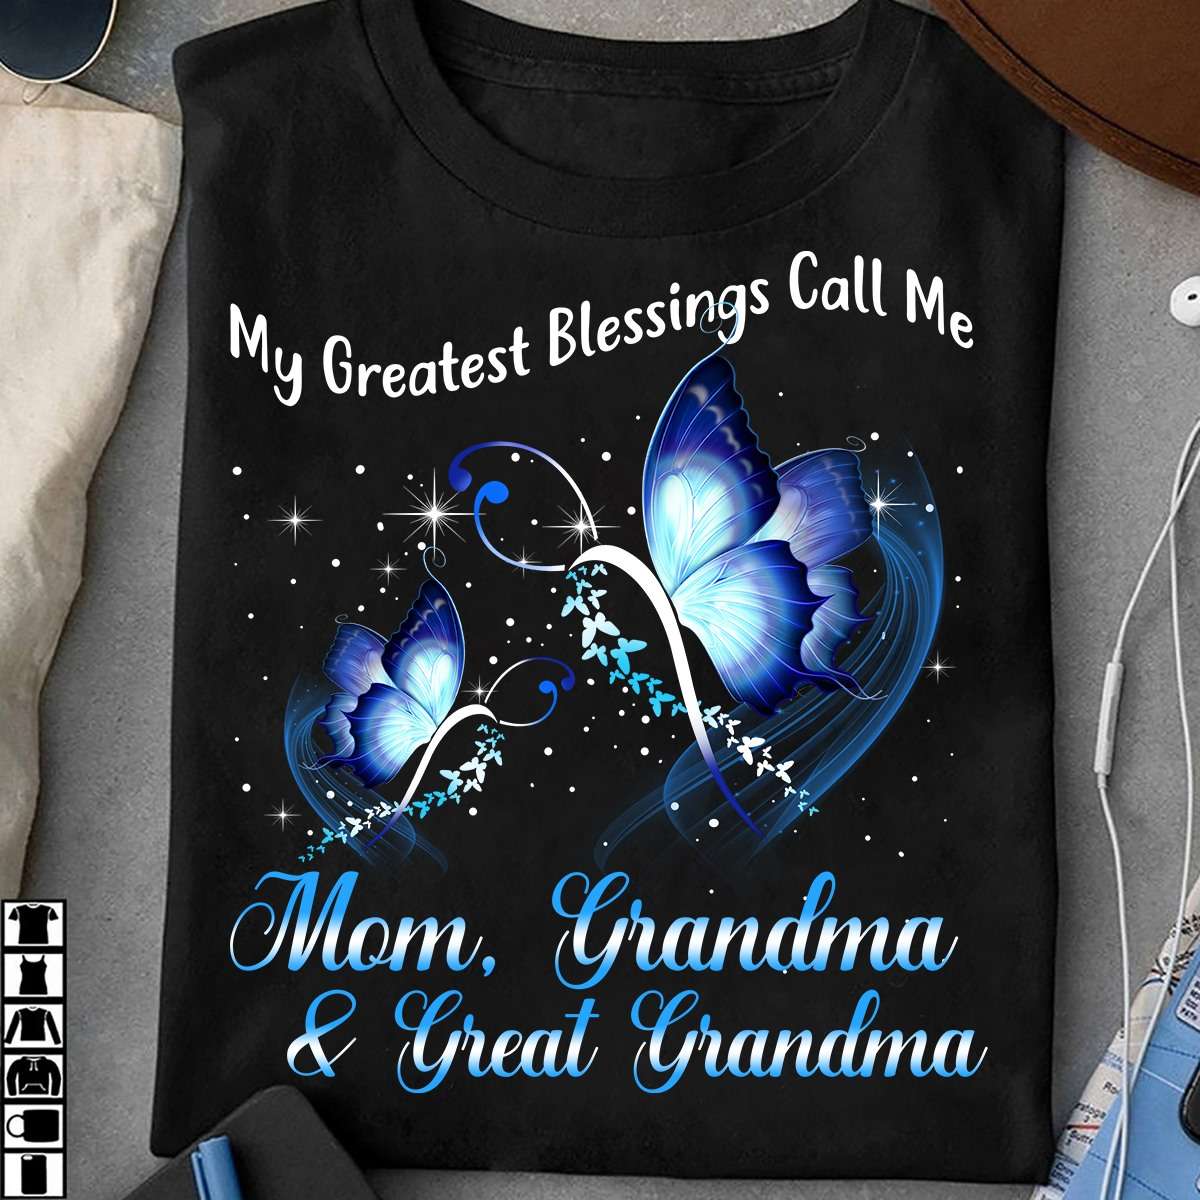 My greateast blessings call me mom, grandma and great grandma - Women's day gift, butterflies family